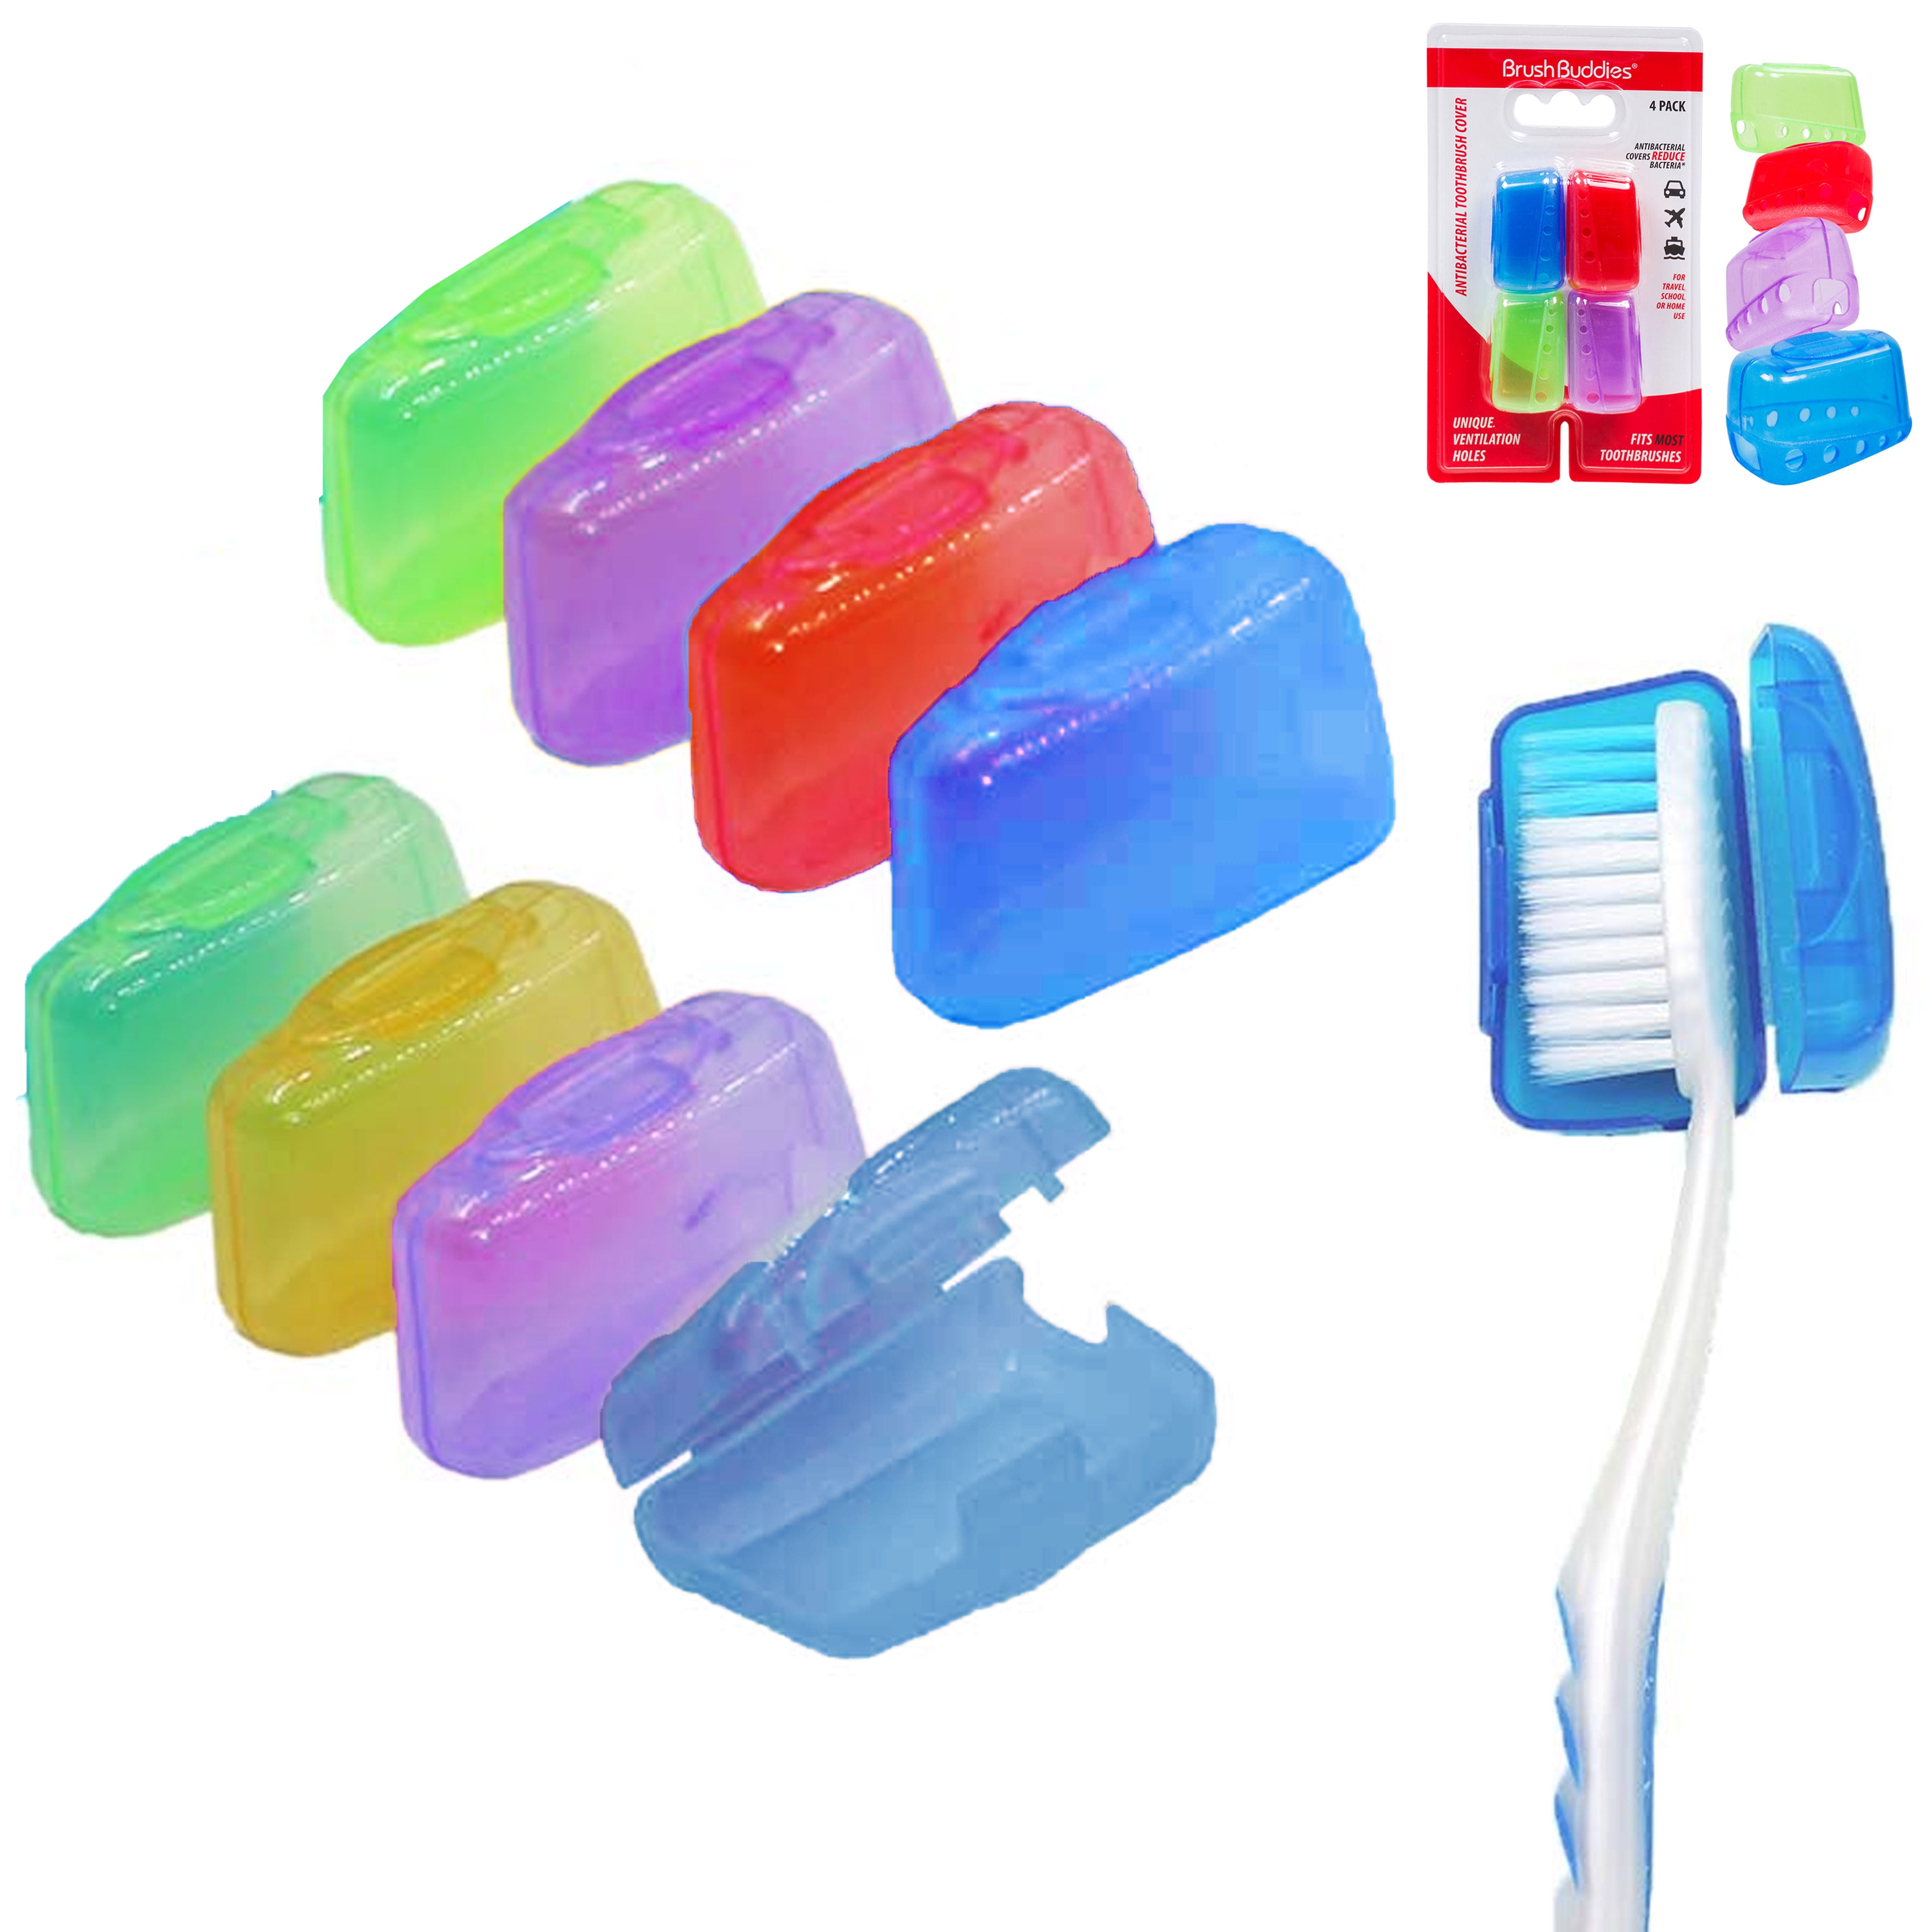 5pc Travel Toothbrush Head Covers Case Brush Cap Box Protecter Holder Teeth sfgf 